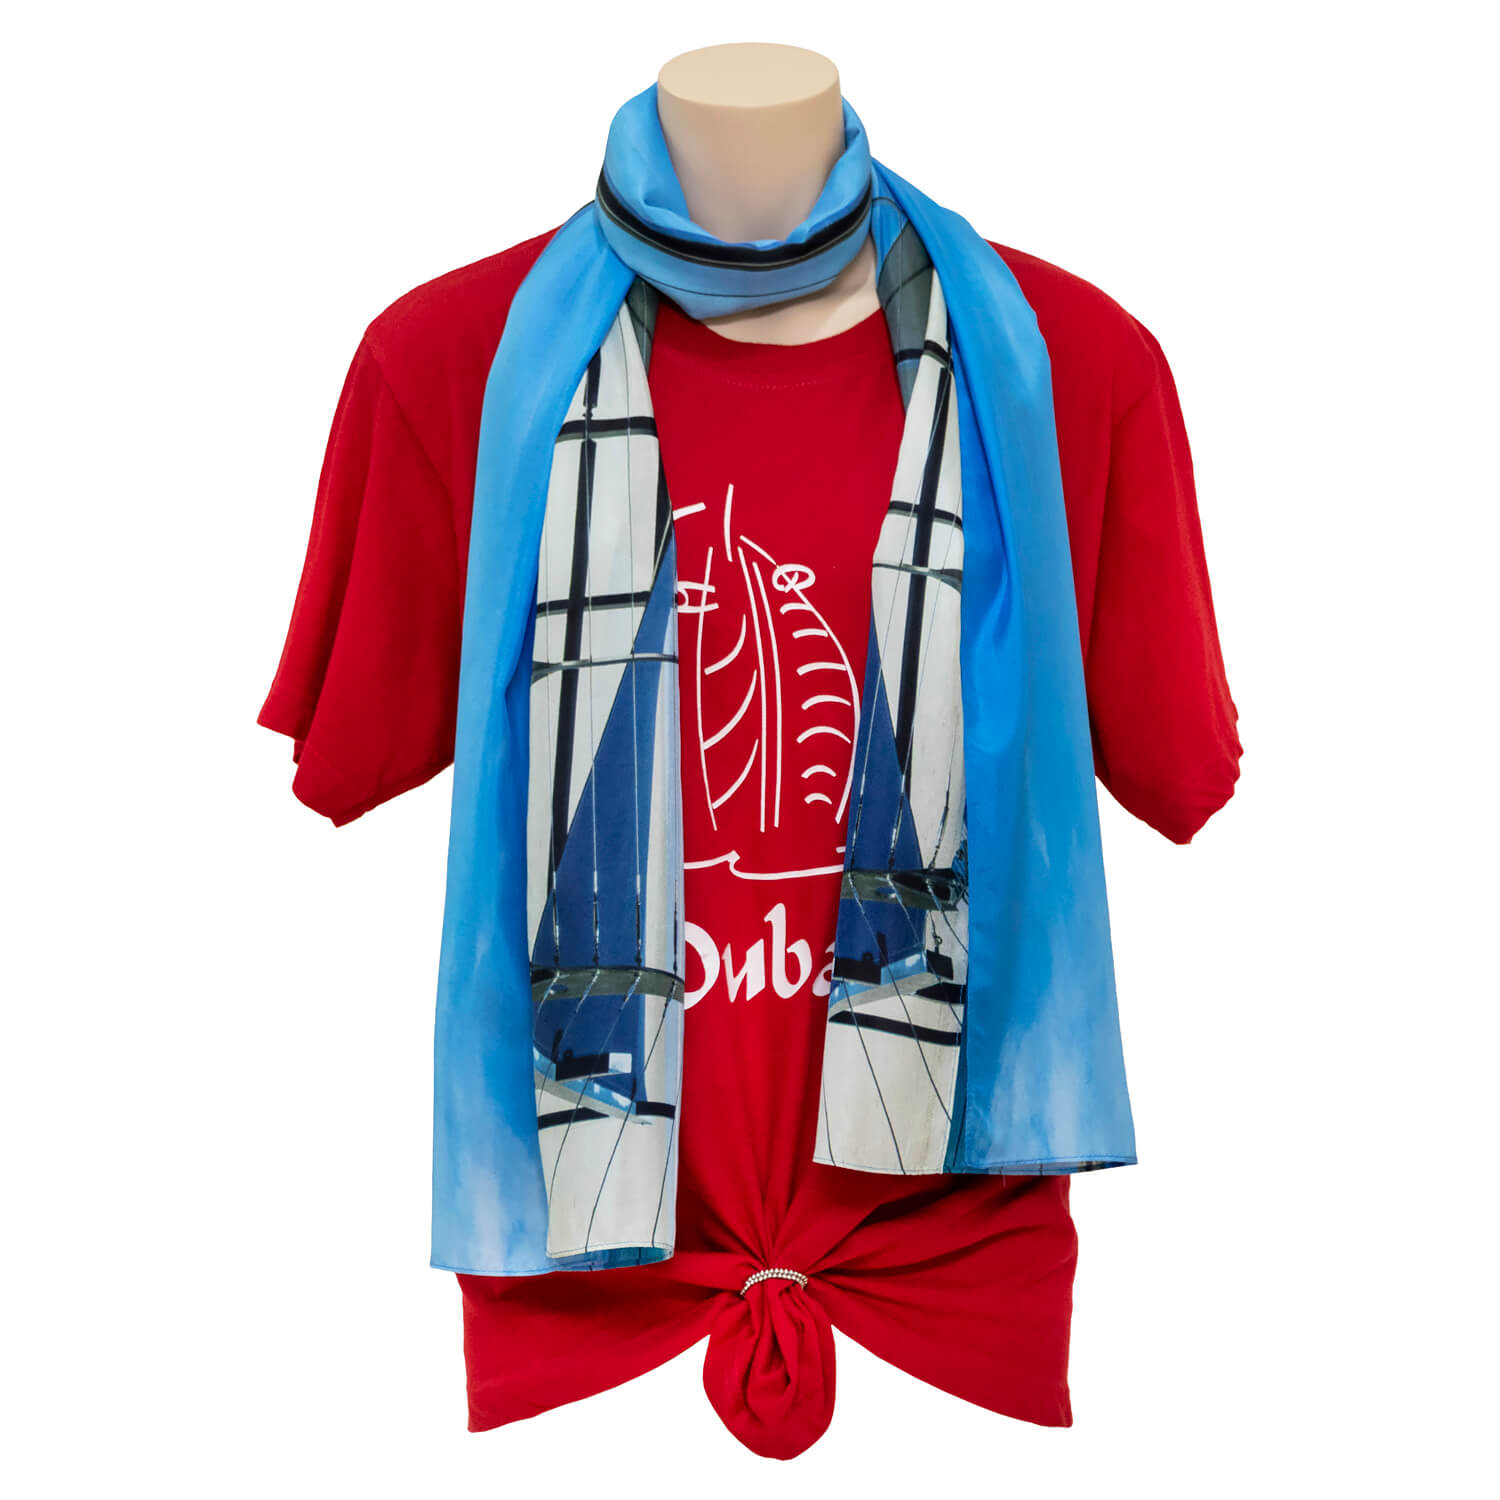 mooloo view blue silk scarf with red tee shirt